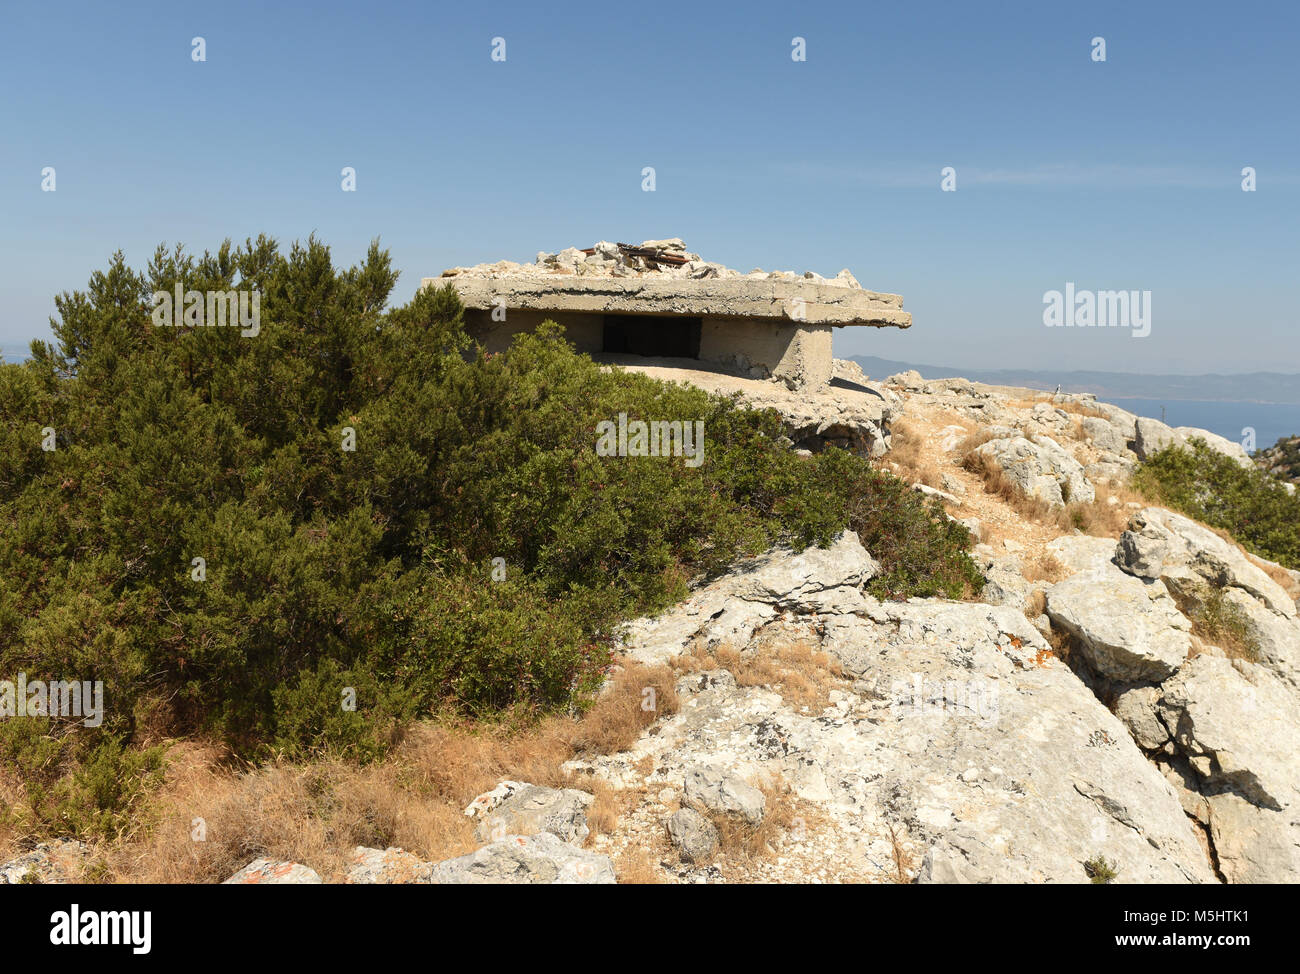 Abandoned military facility on the island Lastovo, Croatia. Yugoslav People's Army was stationed here because Lastovo was one of its main military bas Stock Photo